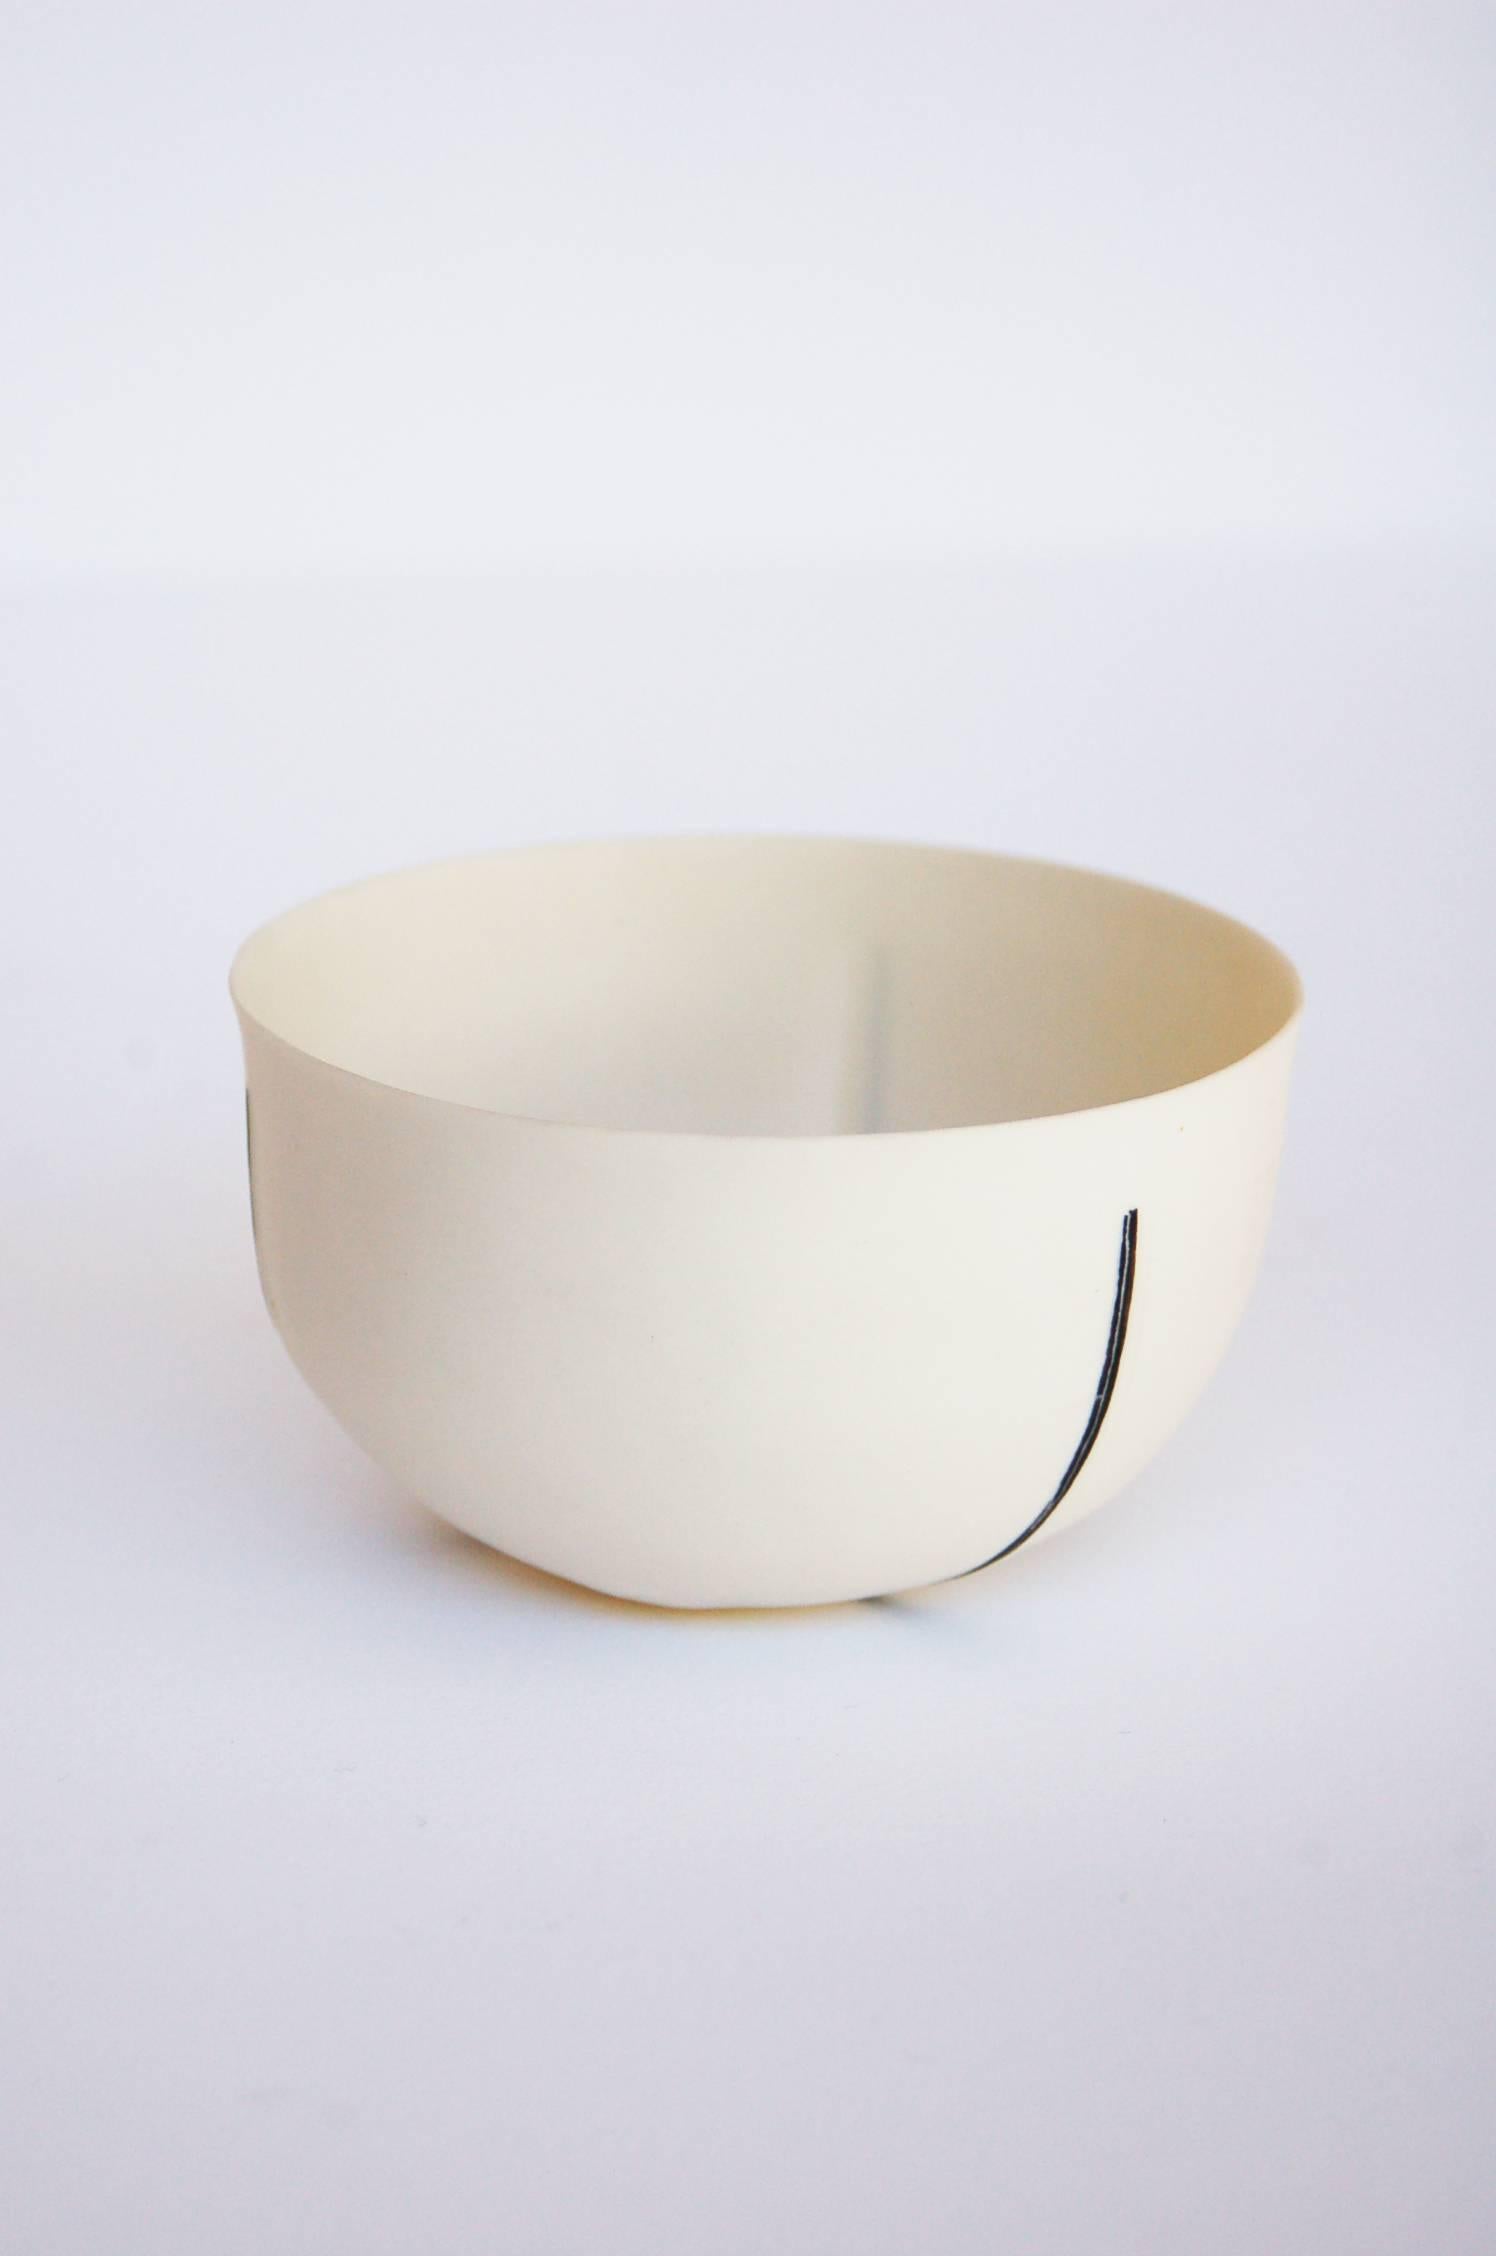 Spanish Black and White Porcelain Bowl by Carman Ballarin For Sale